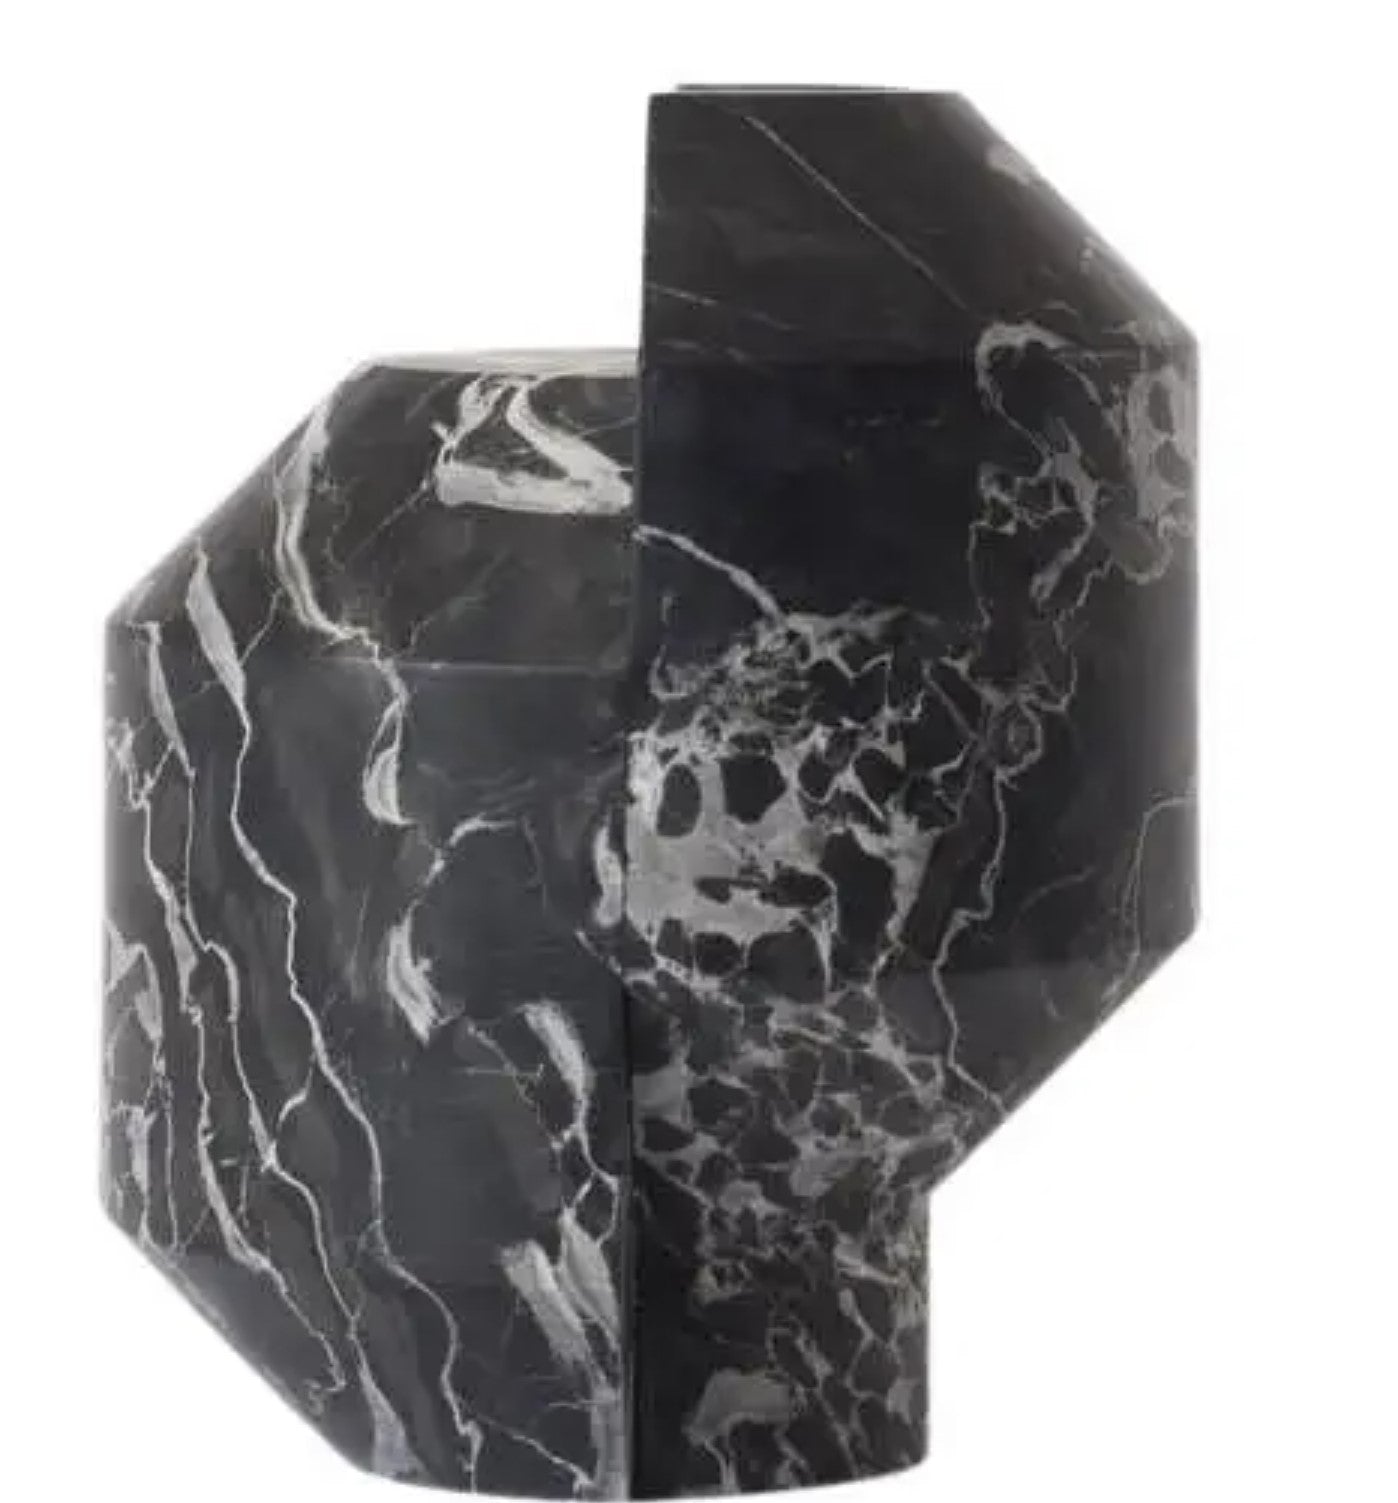 Toucana Small Portoro Marble Flower Vase and Candle Holder - $1,048.00